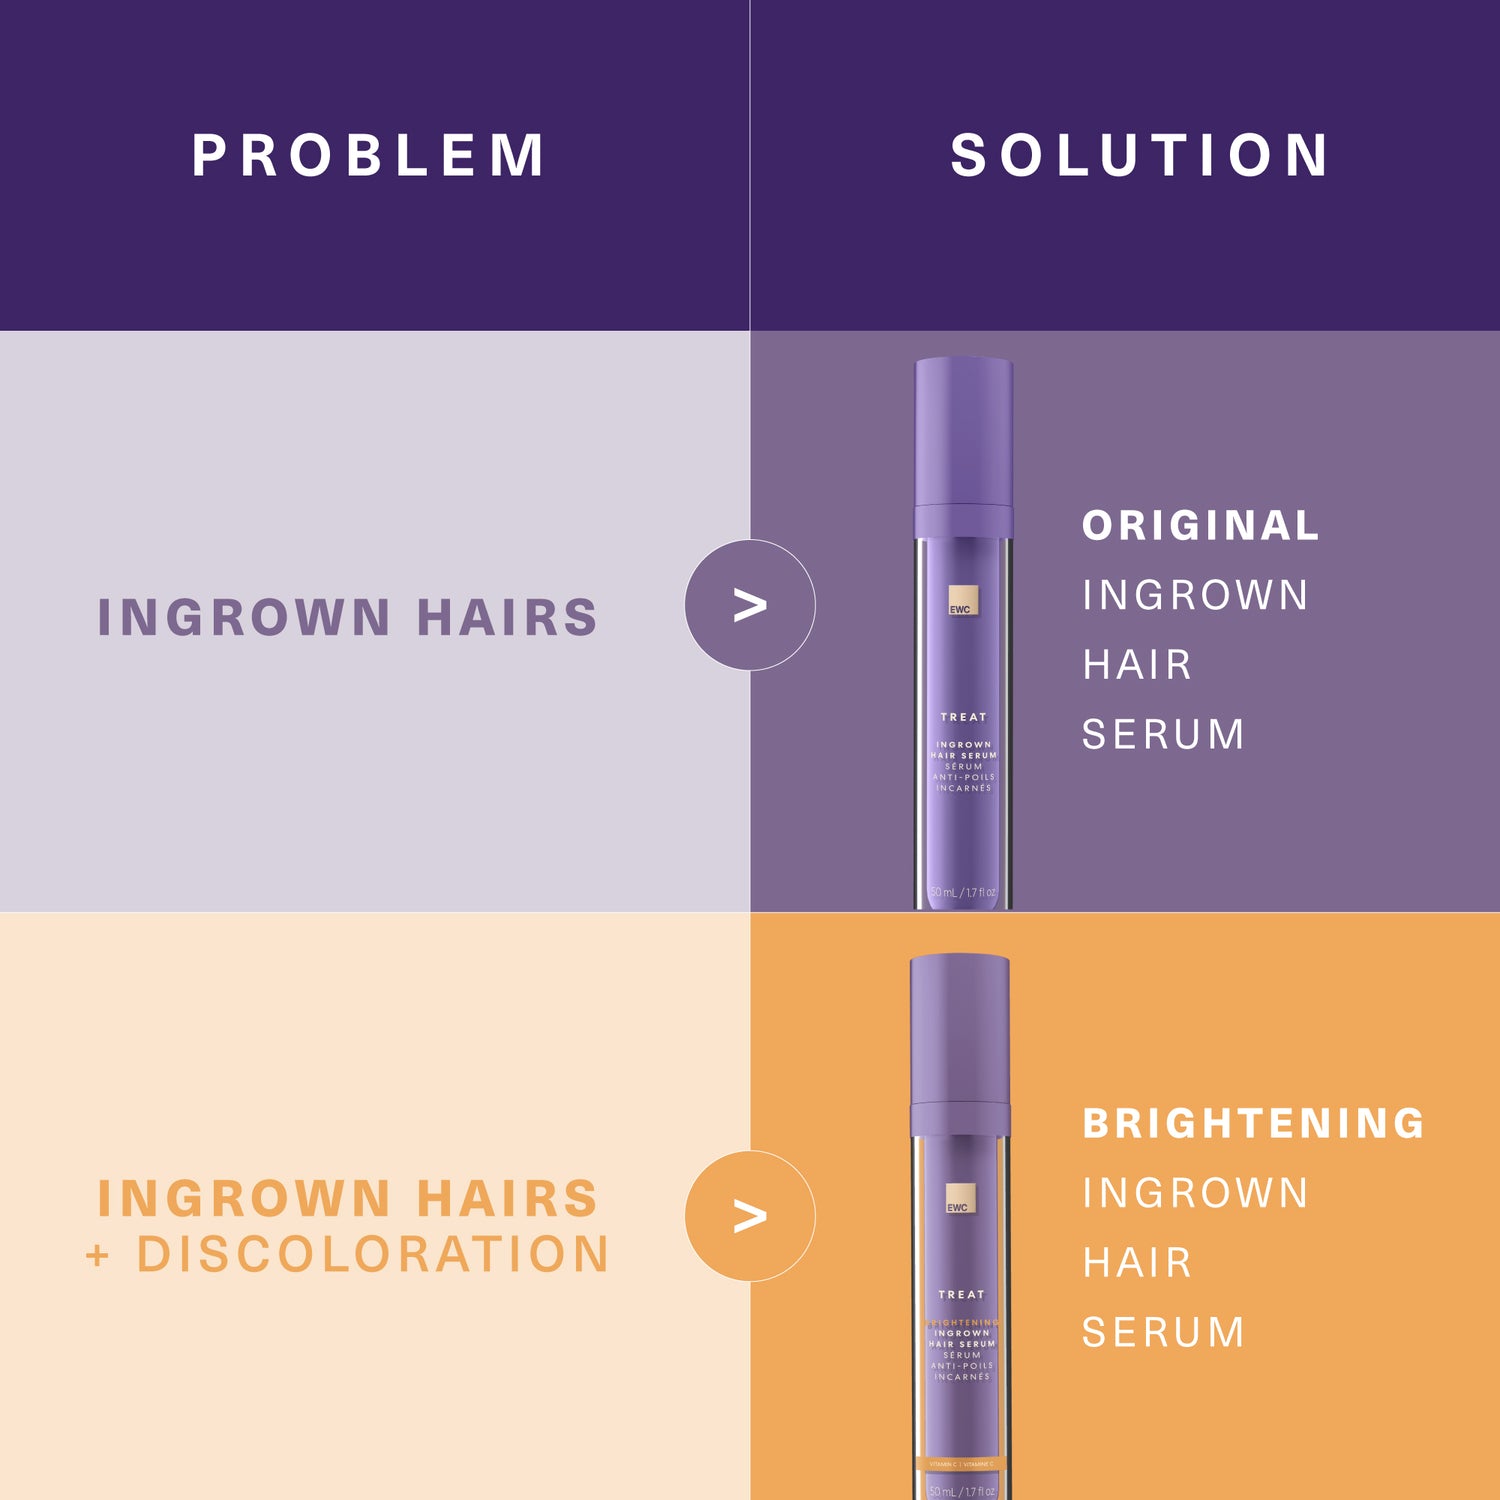 Problem and Solution infographic of European Wax Center Brightening and Original serums